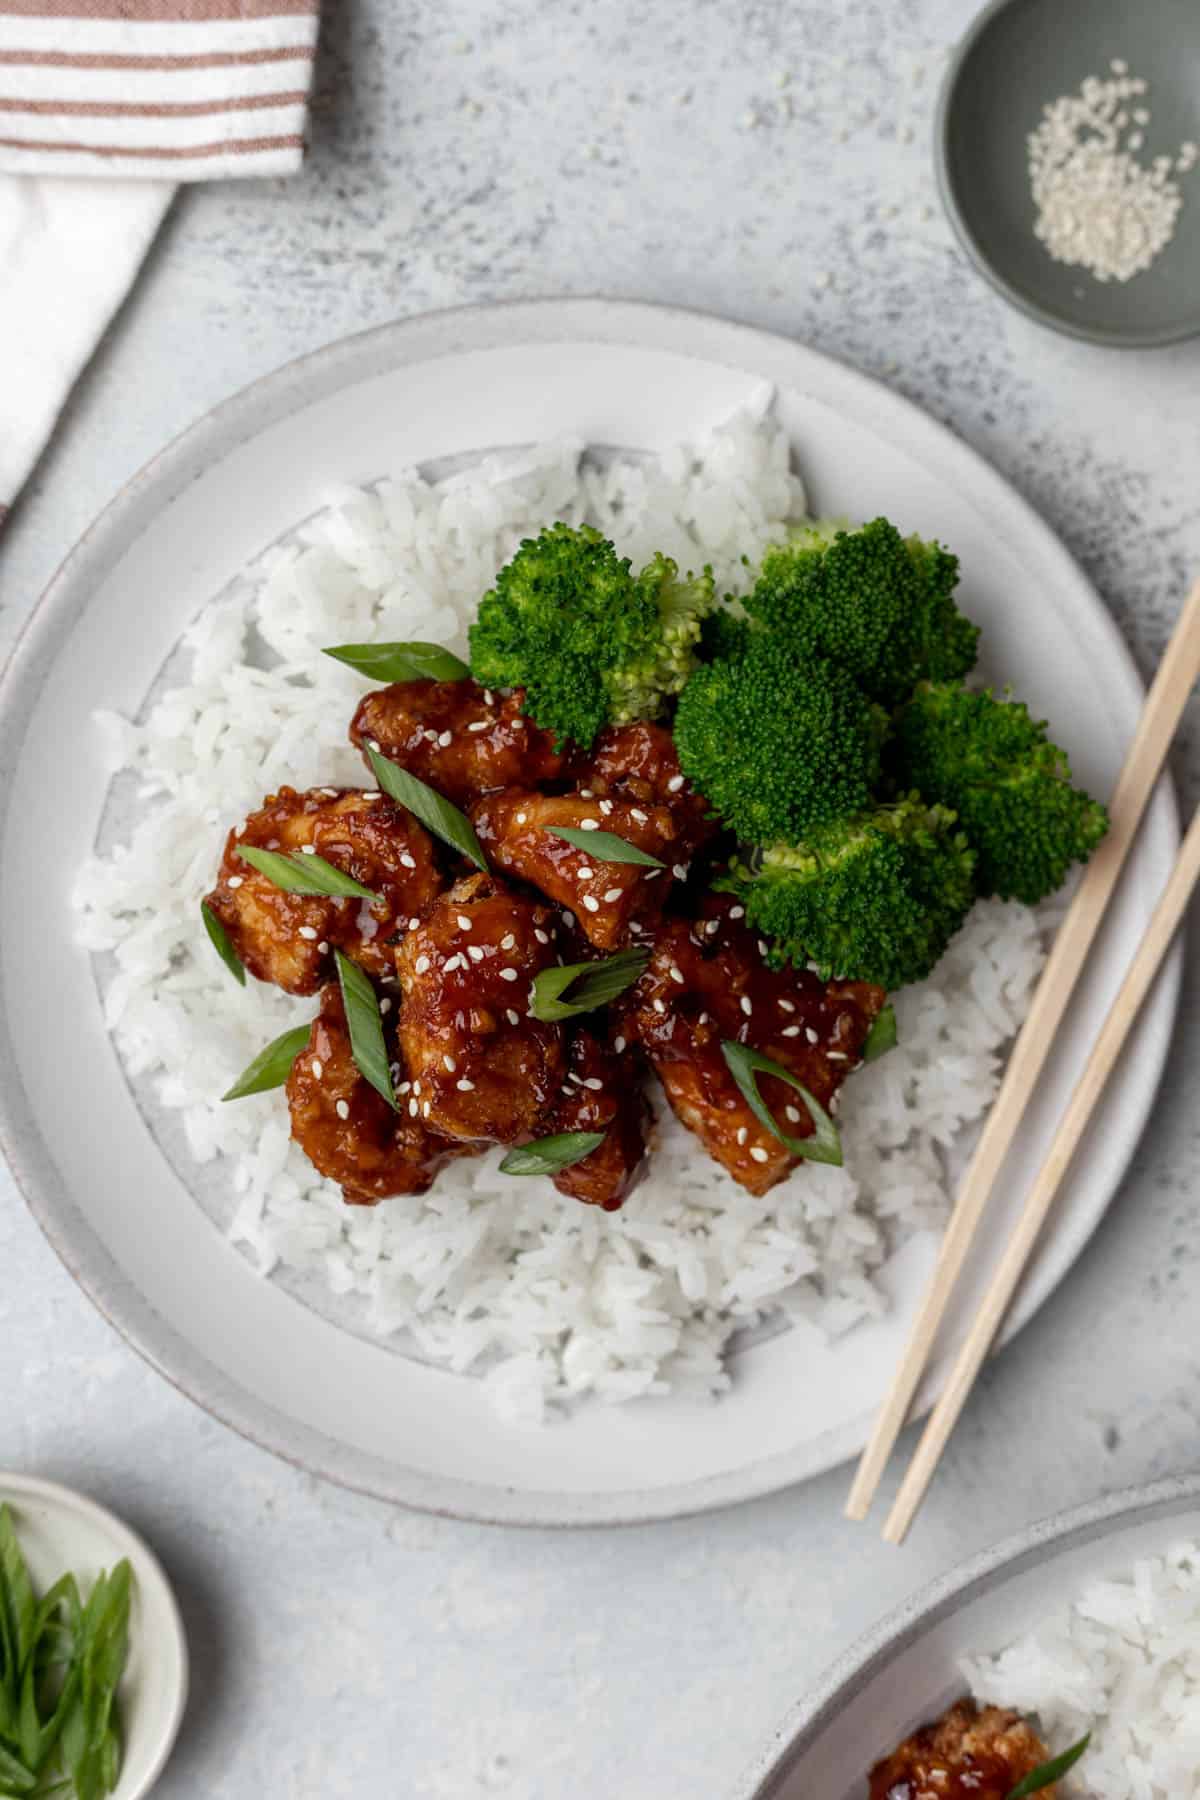 Air fryer general tso's chicken on a bed of rice with a side of steamed broccoli and chopsticks.